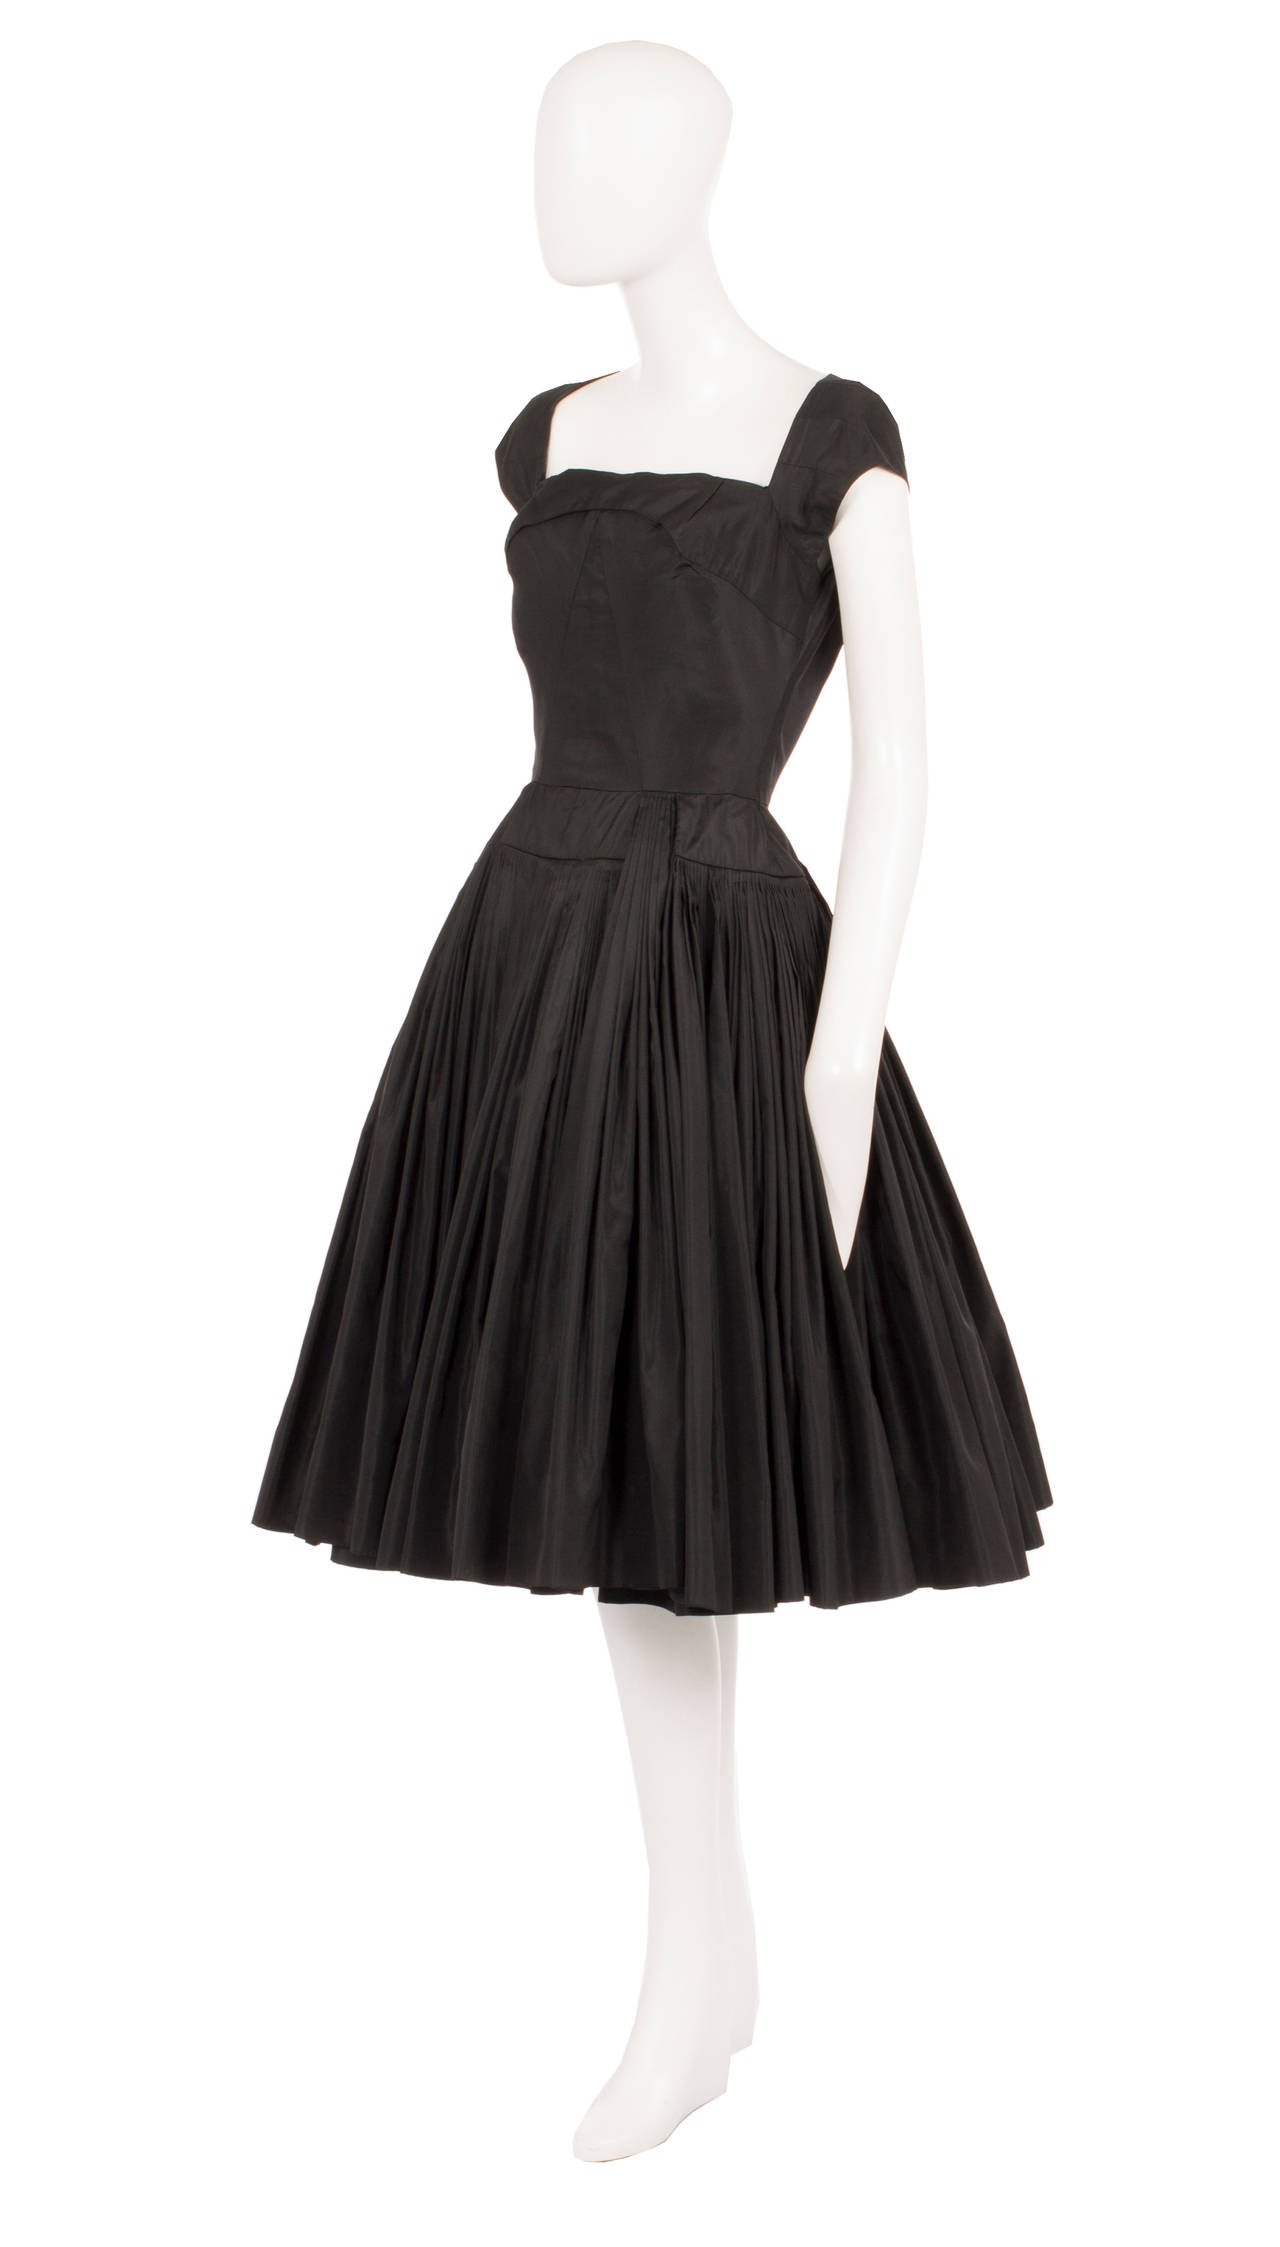 A classic LBD that will work for a multitude of events, this dress is constructed from silk taffeta and features capped sleeves and a square neckline. The wide pleated skirt accentuates the waist and creates a flattering 1950s silhouette. Just add a